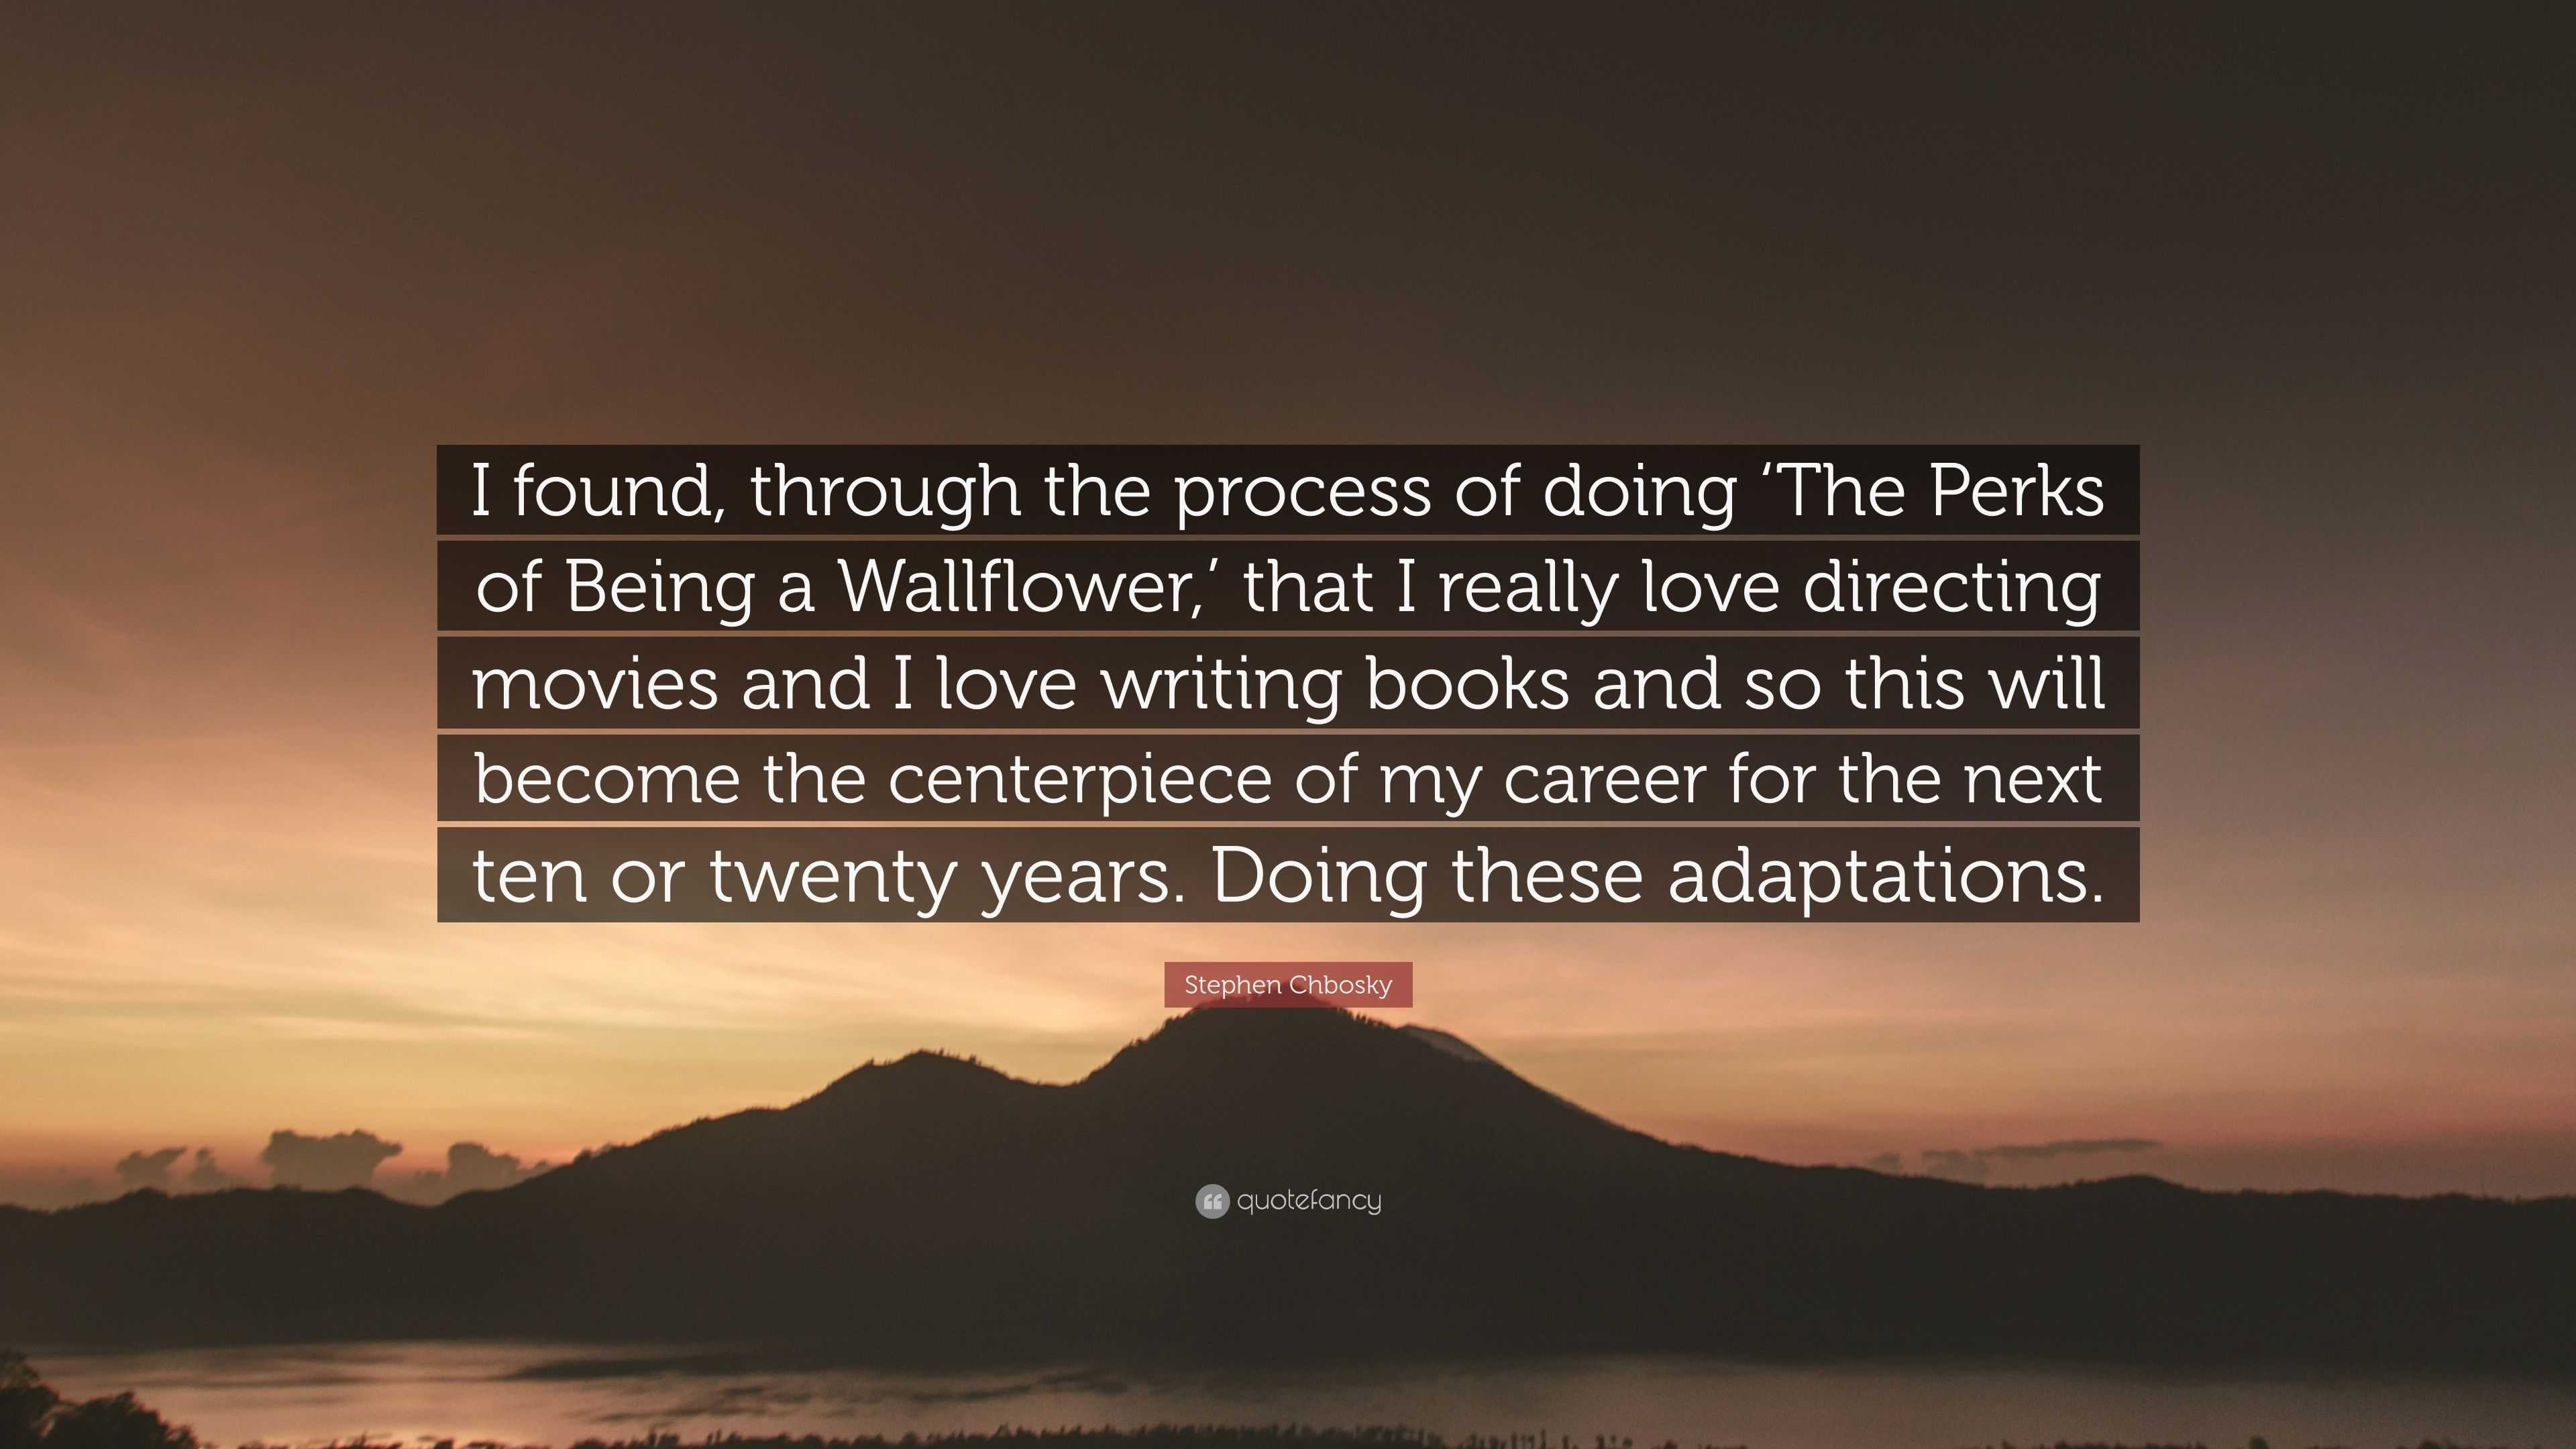 Growth and Development in Stephen Chbosky's [The Perks of Being a